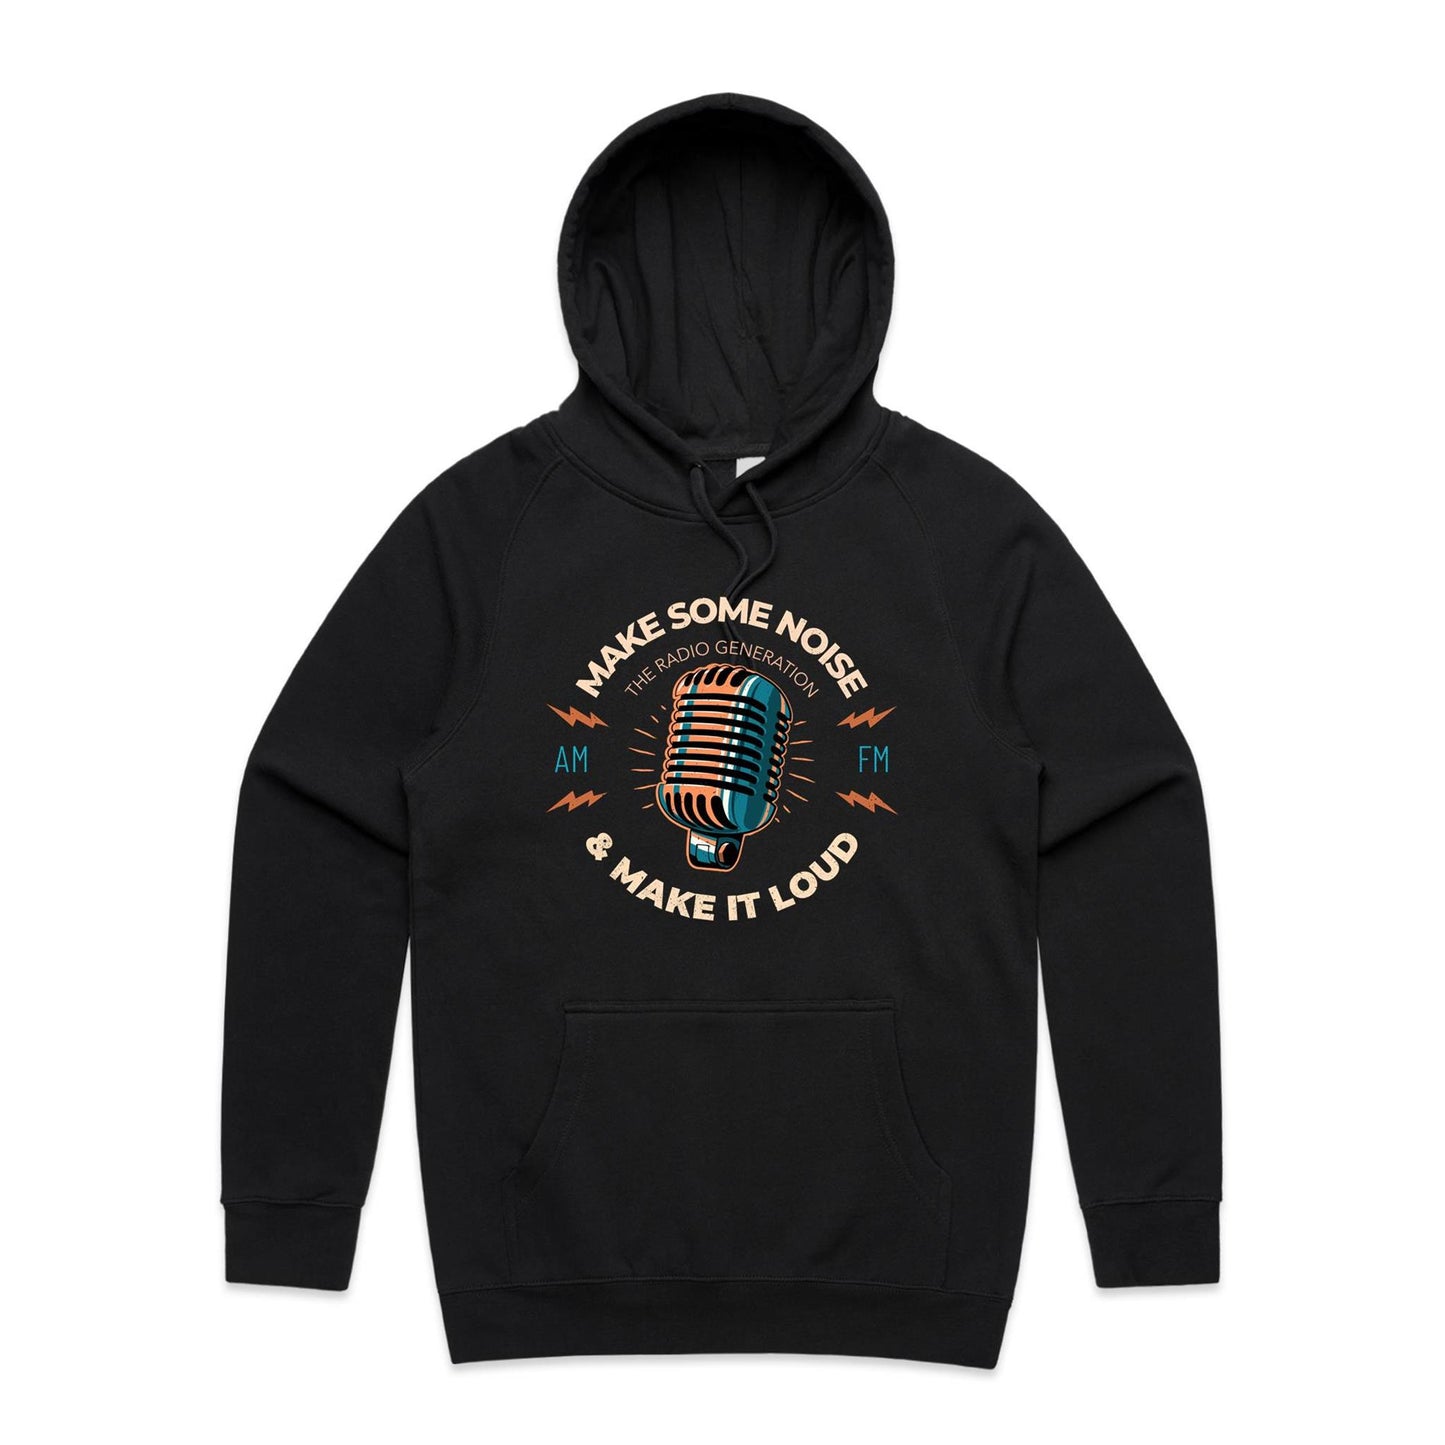 Make Some Noise And Make It Loud - Supply Hood Black Mens Supply Hoodie Music